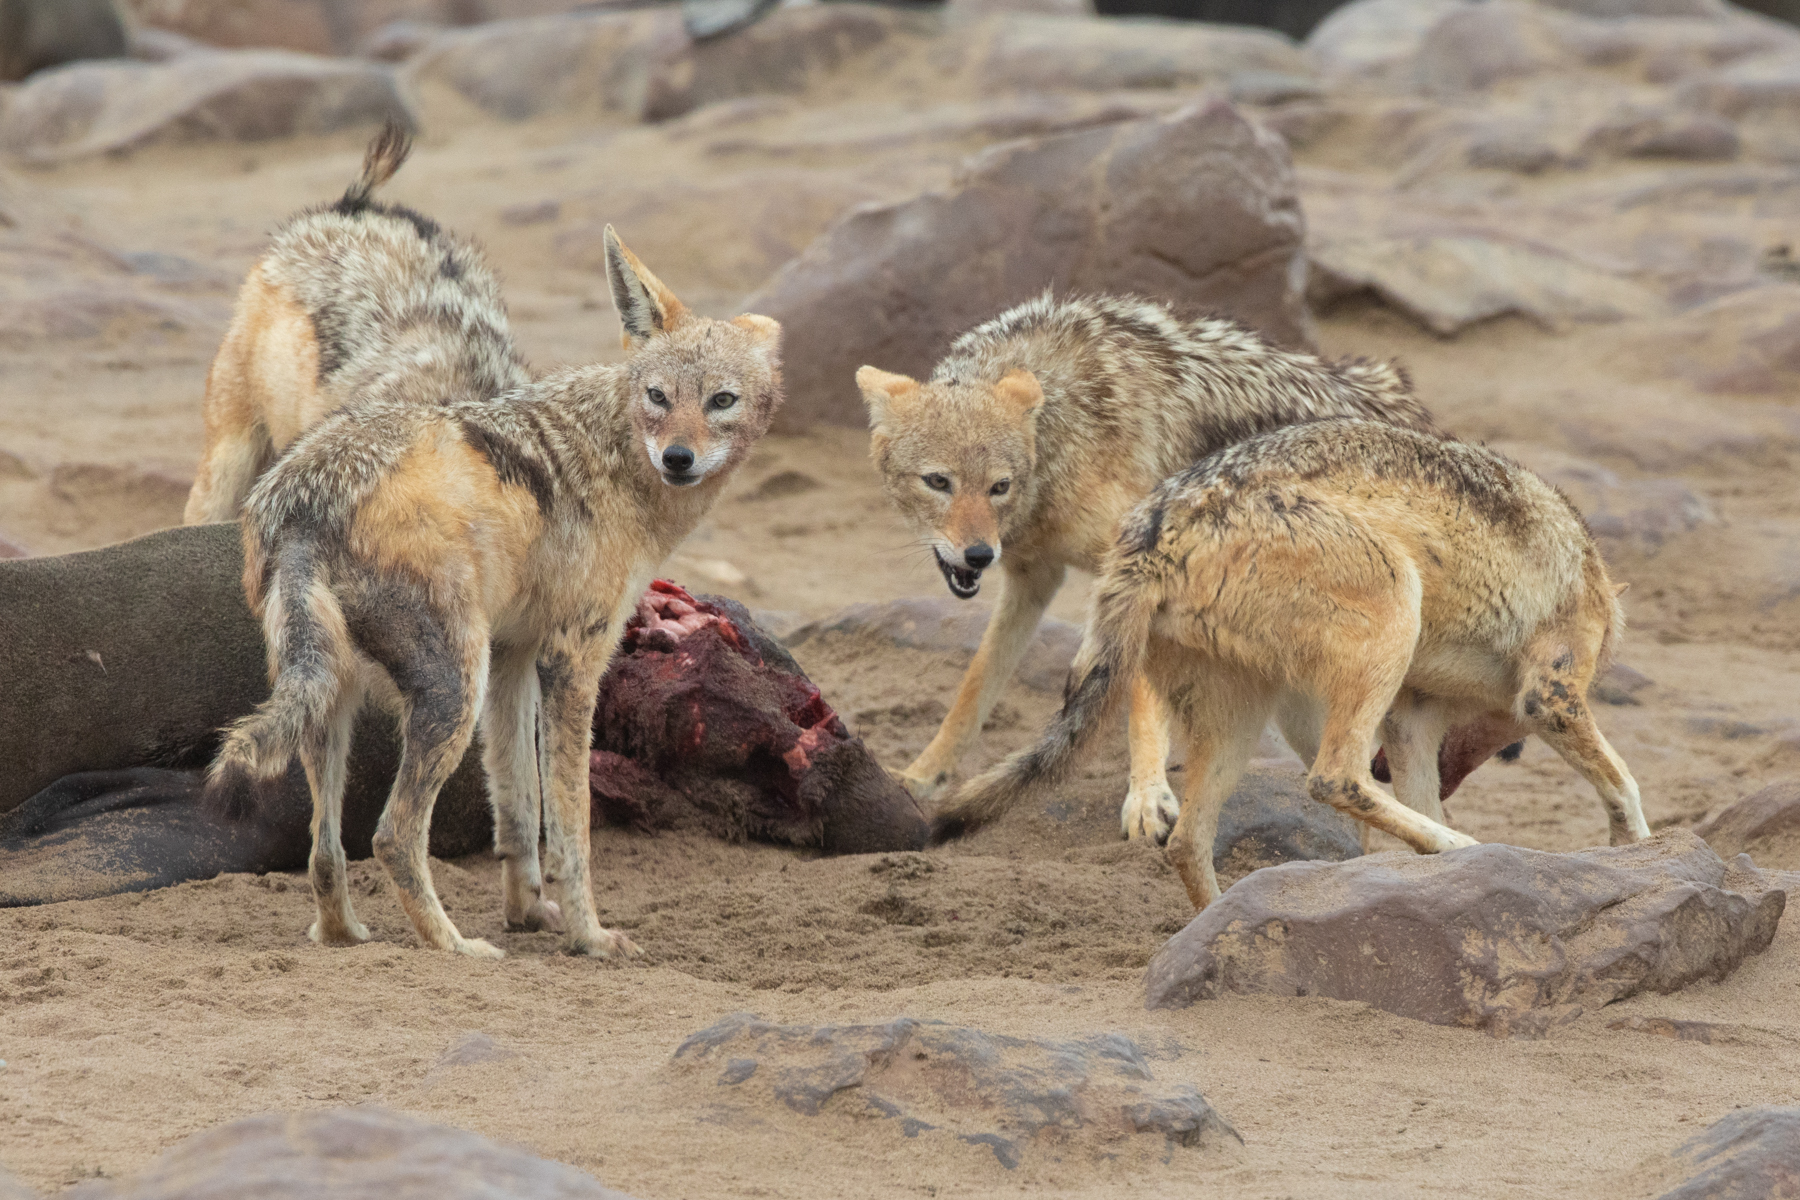 A pack of Black-backed Jackals argue over a dead seal carcass at Cape Cross during our wildlife photo tour of Namibia